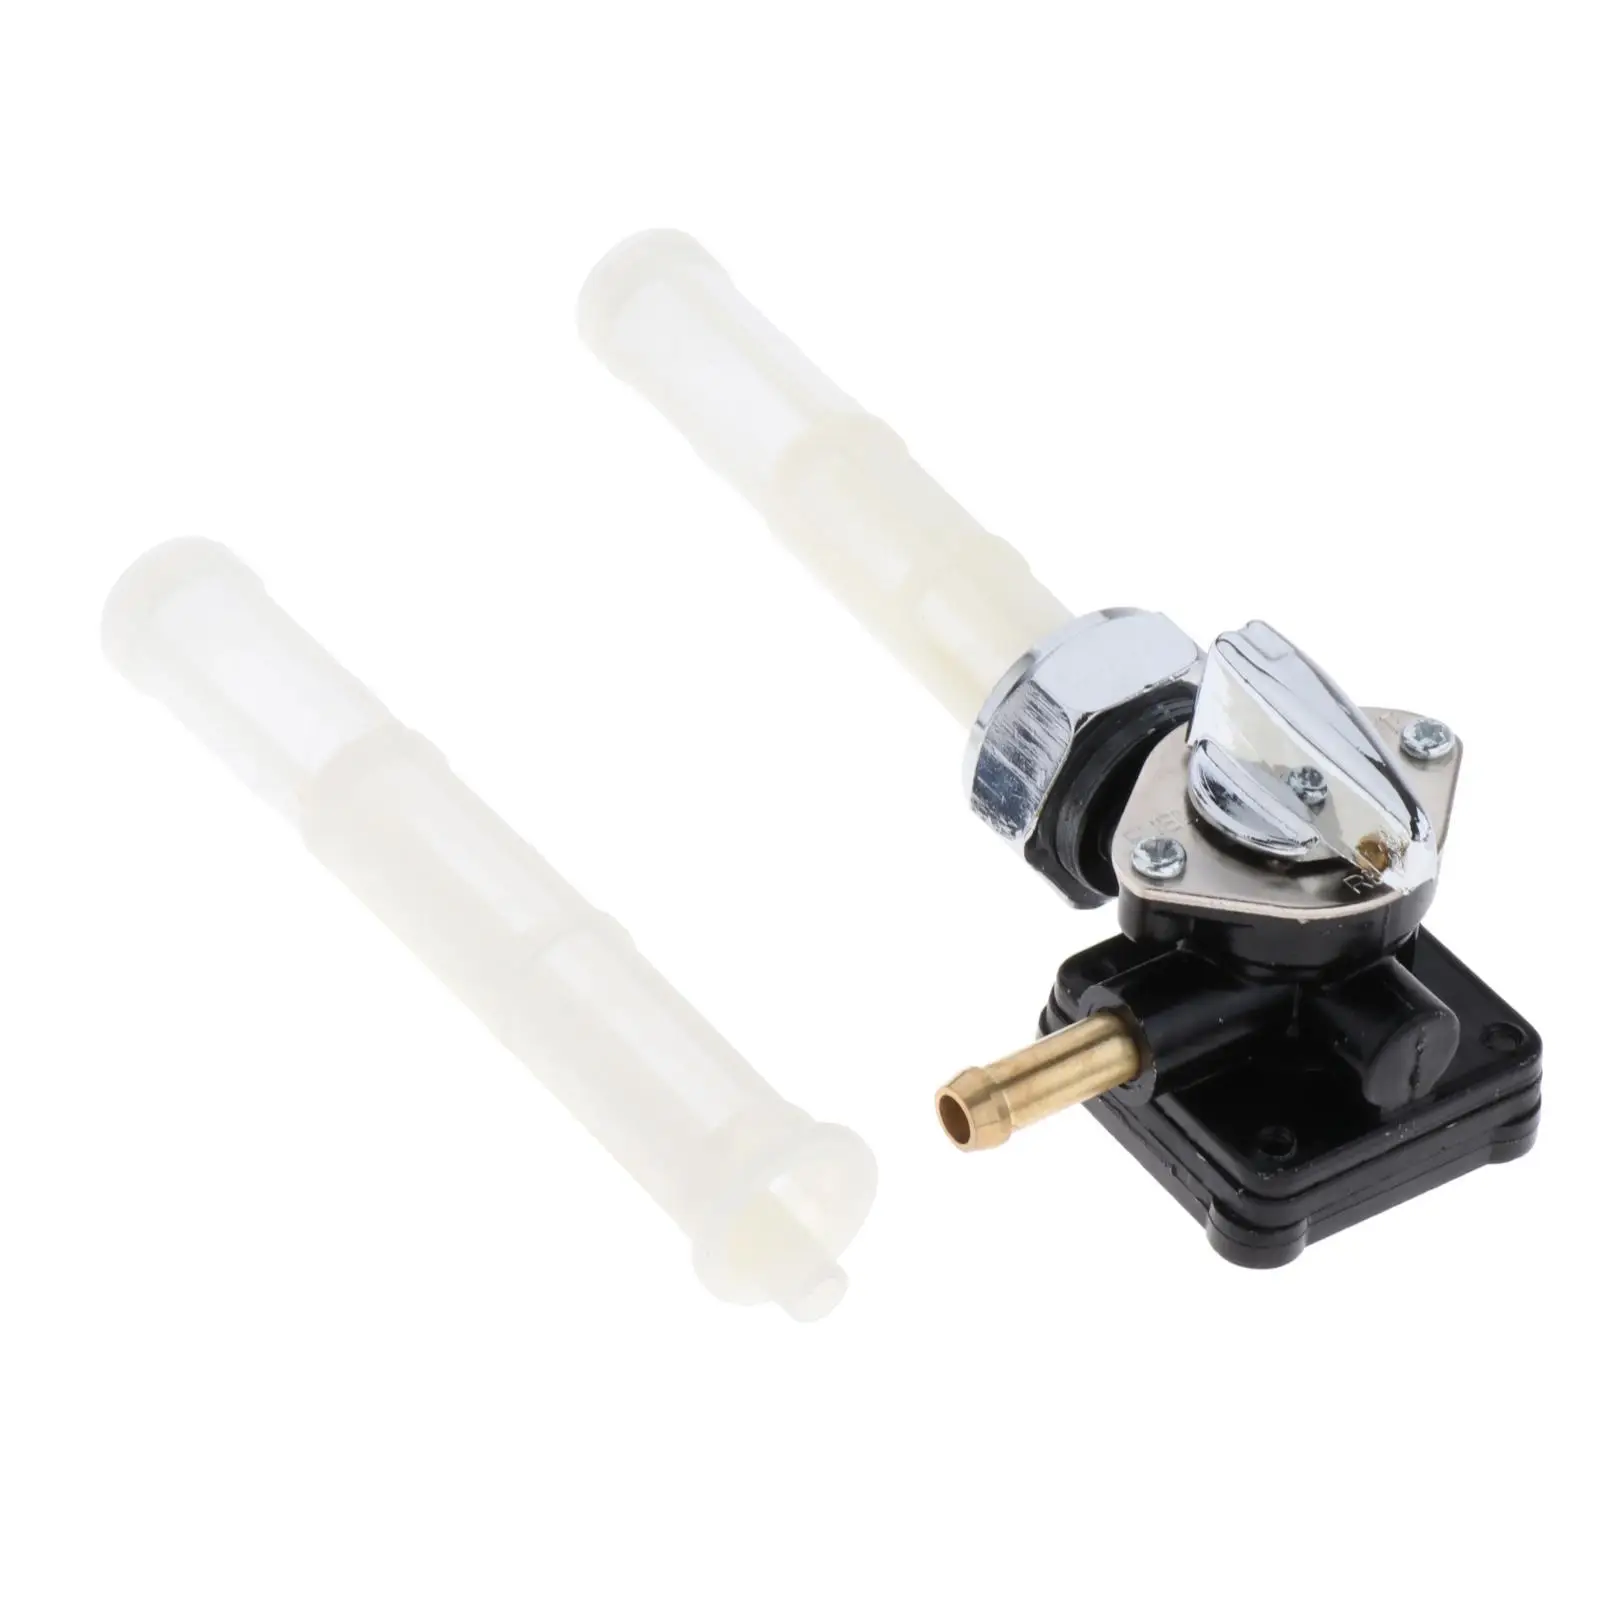 Durable Fuel Valve Petcock with Filter Mesh Metal 61338-94D Strong Gas Shut Off Switch for Fxd Fxst Direct Replaces Spare Parts